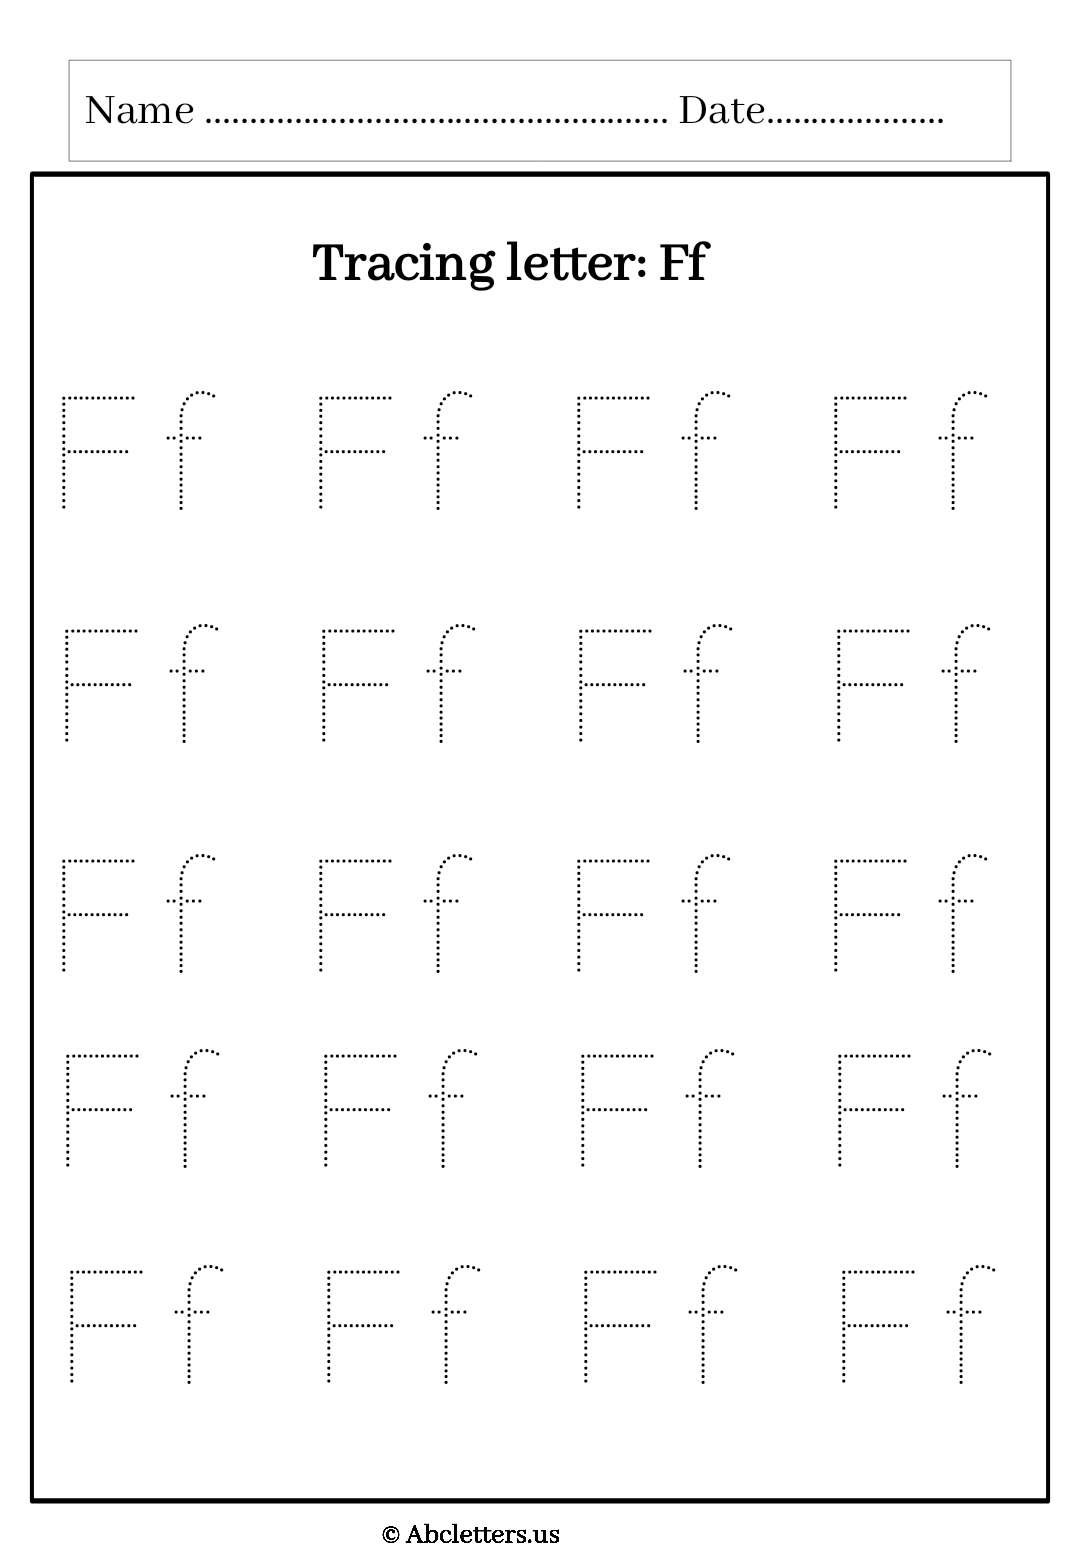 Tracing letter uppercase Ff